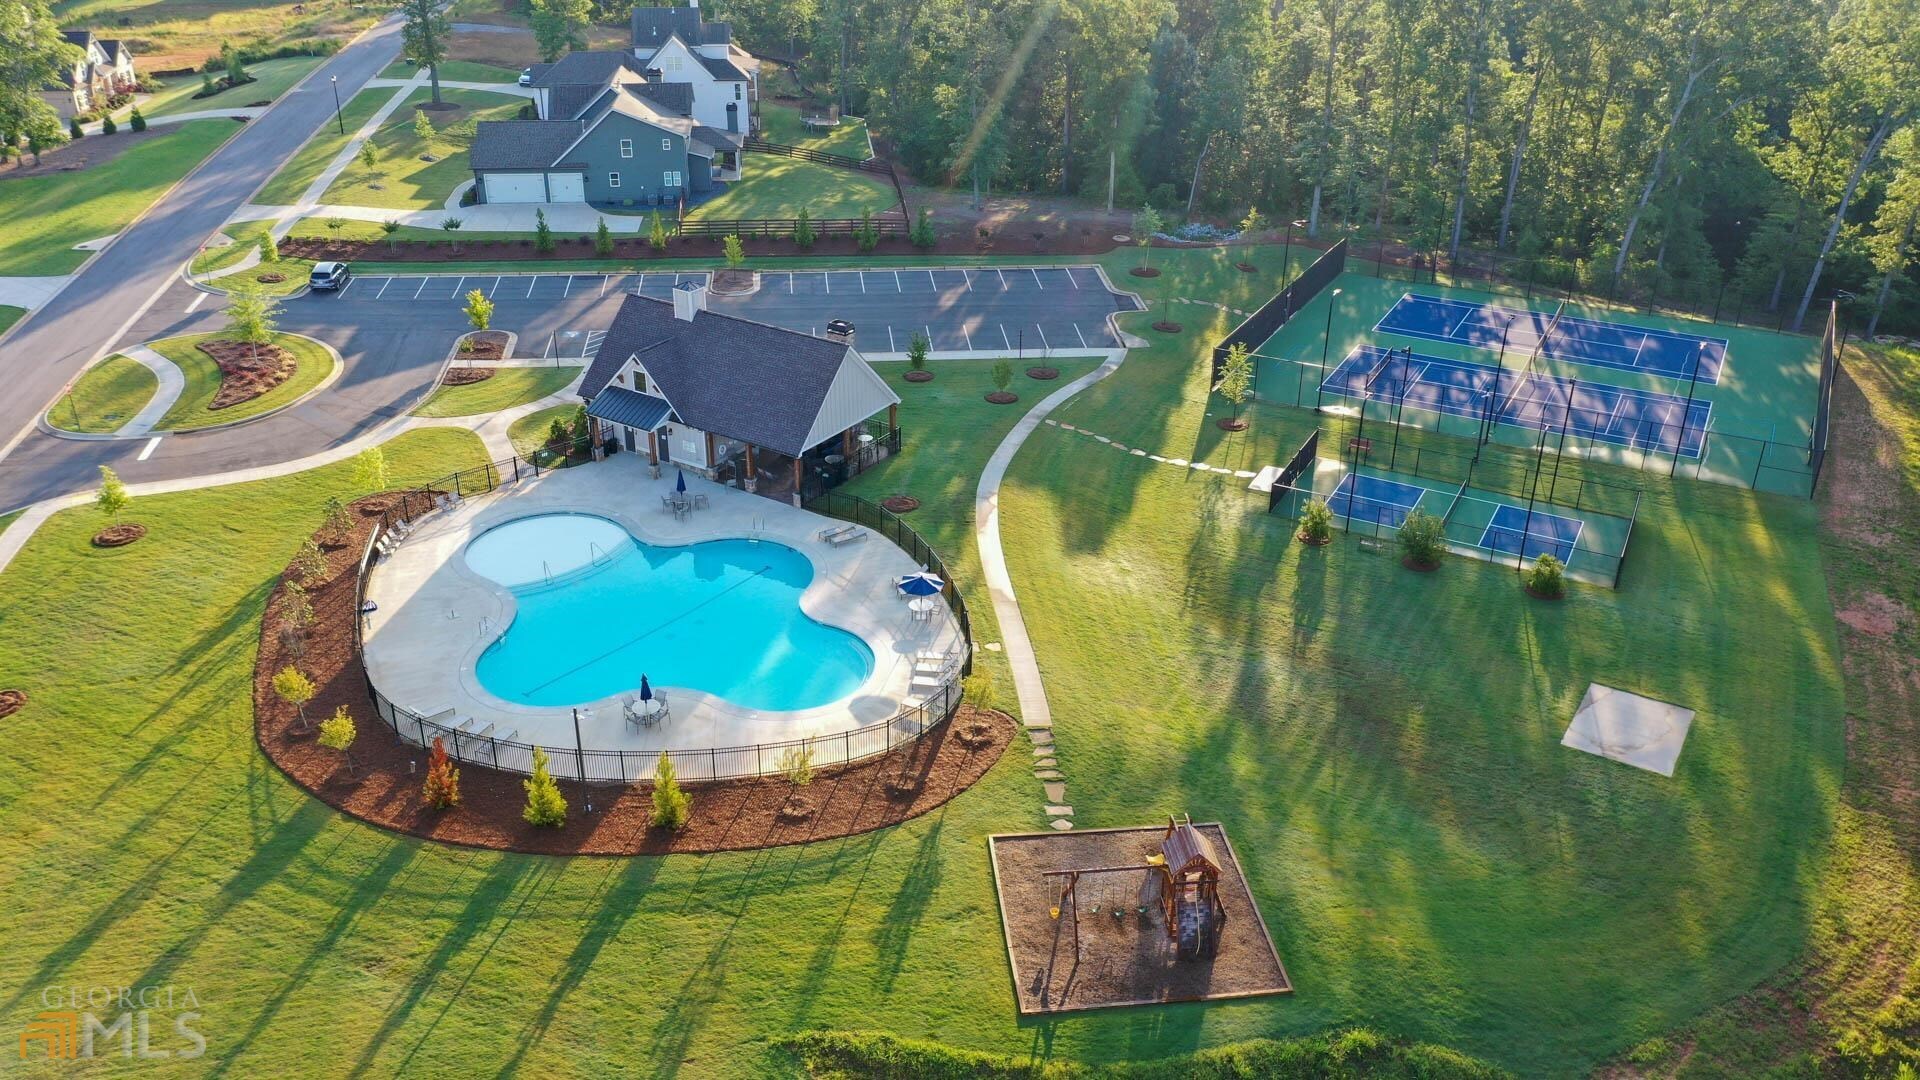 an aerial view of a house with outdoor space pool patio and outdoor seating